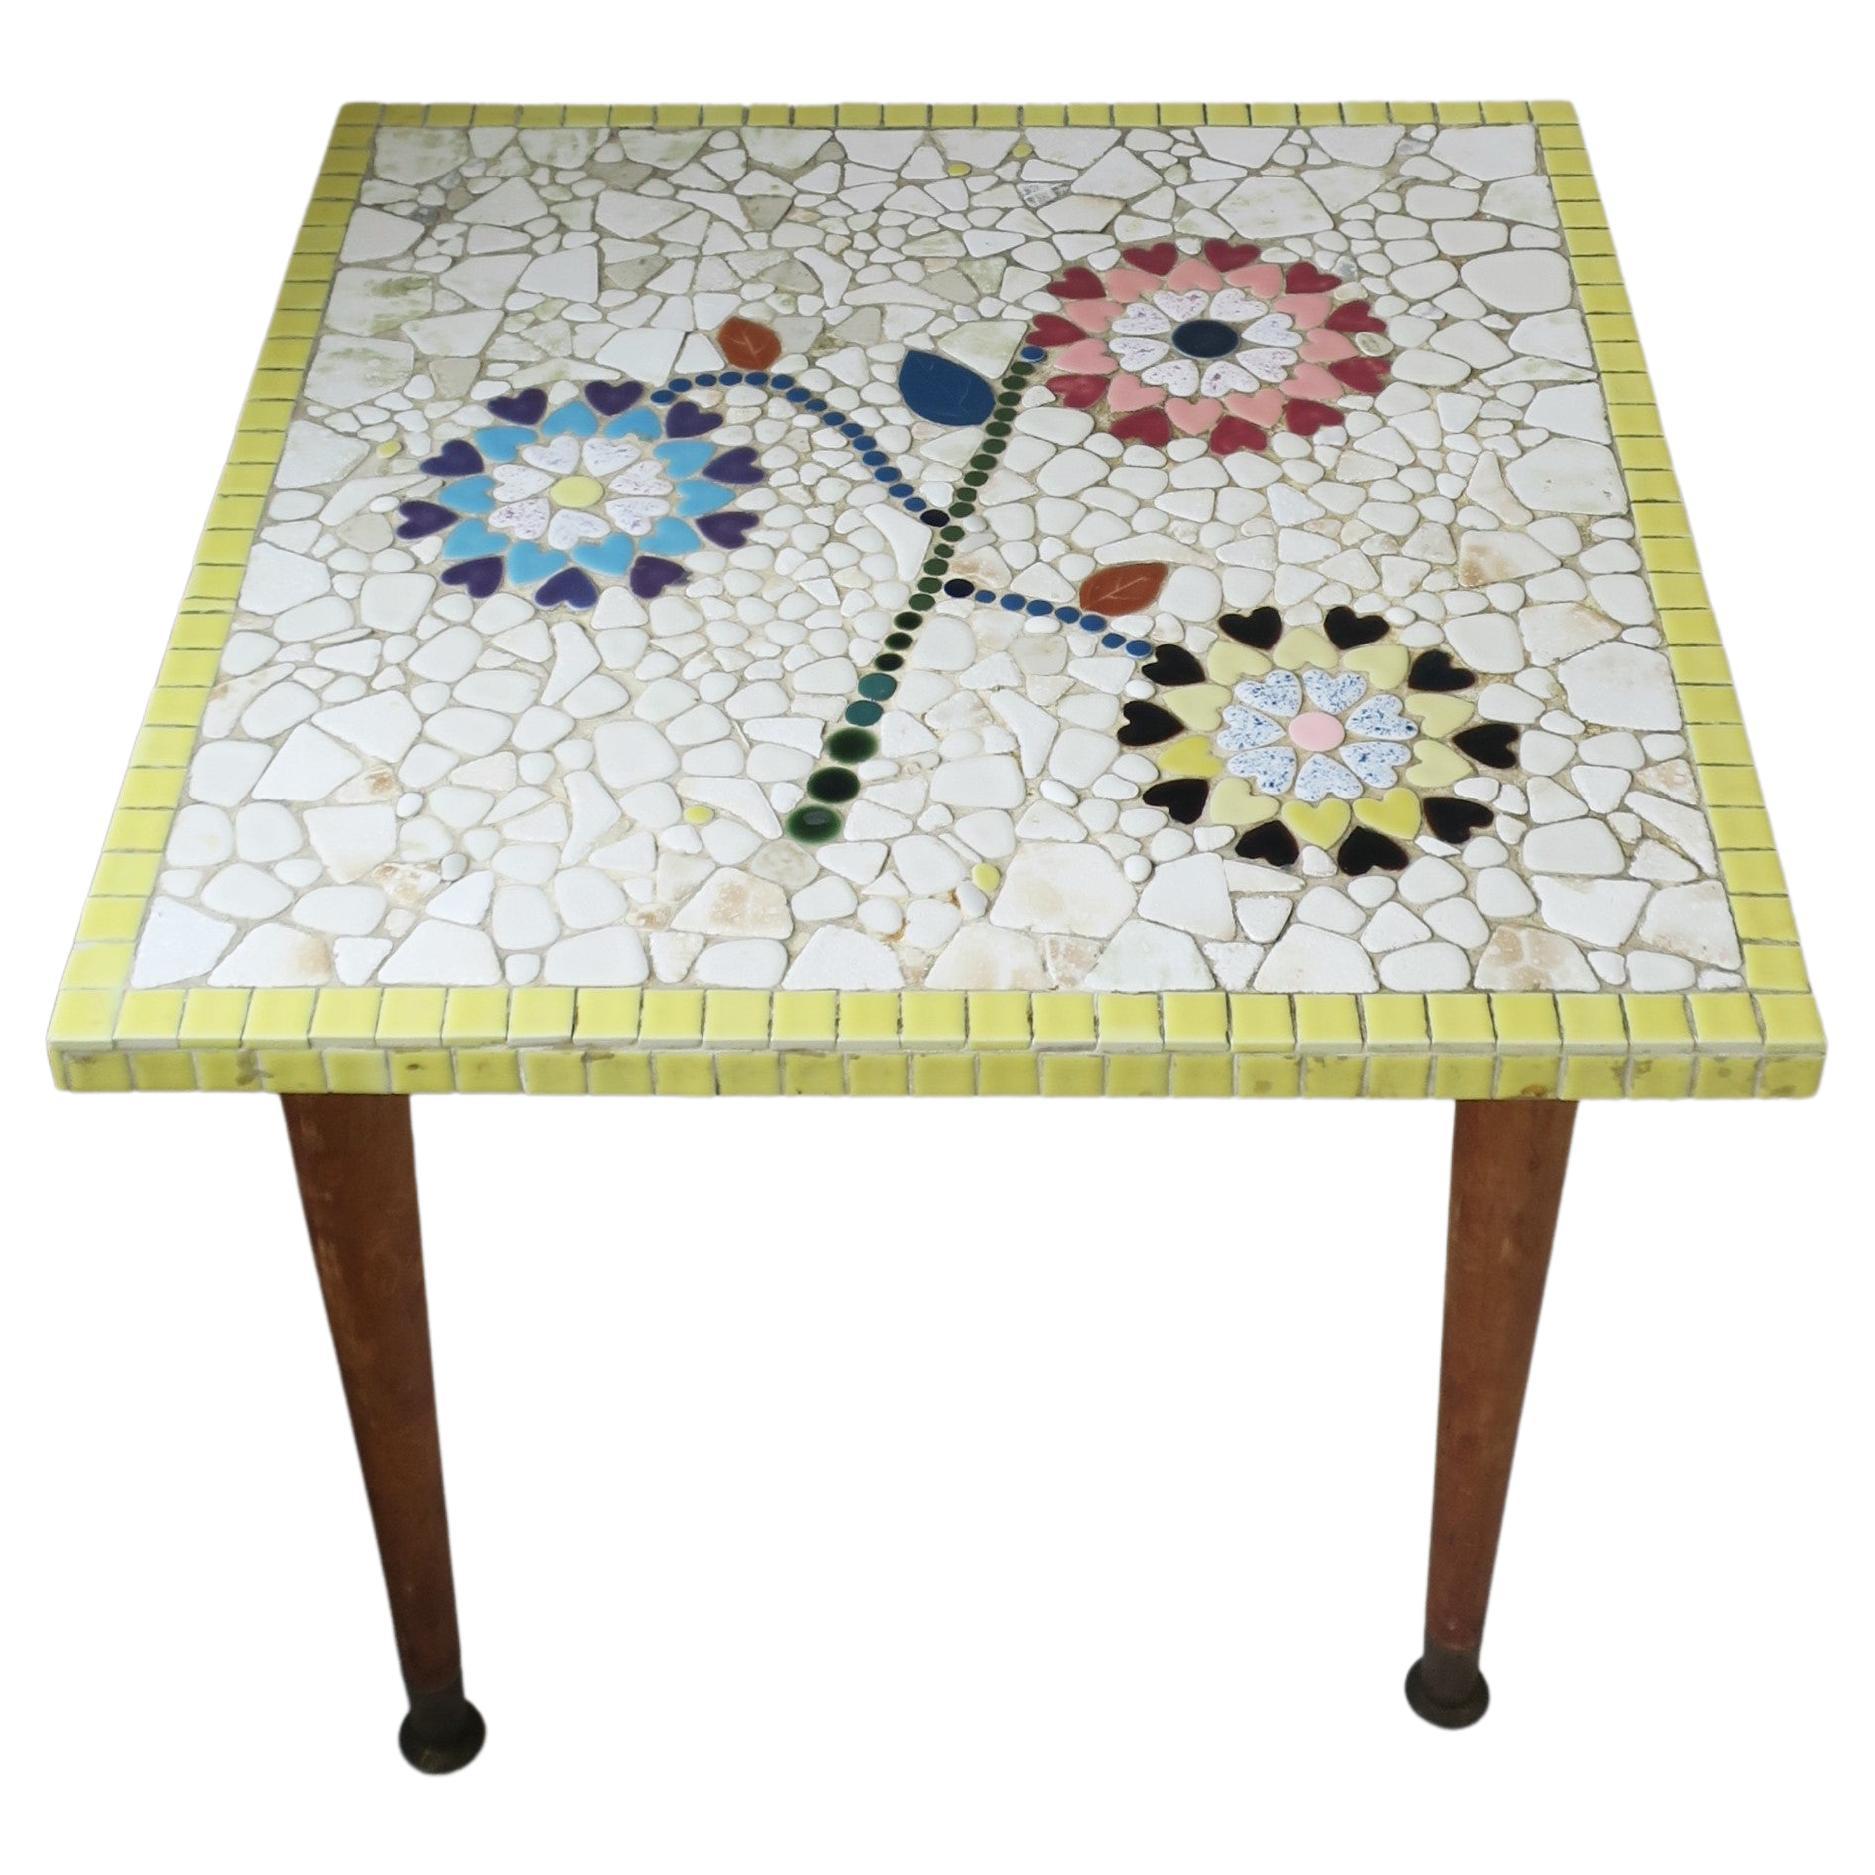 A hand-crafted Mid-Century Modern mosaic tile top end table, circa 1960s. Table is square with three flowers or sunflower-like design comprised of heart shaped tiles, background tiles are white in an organic form, finished with yellow square mosaics